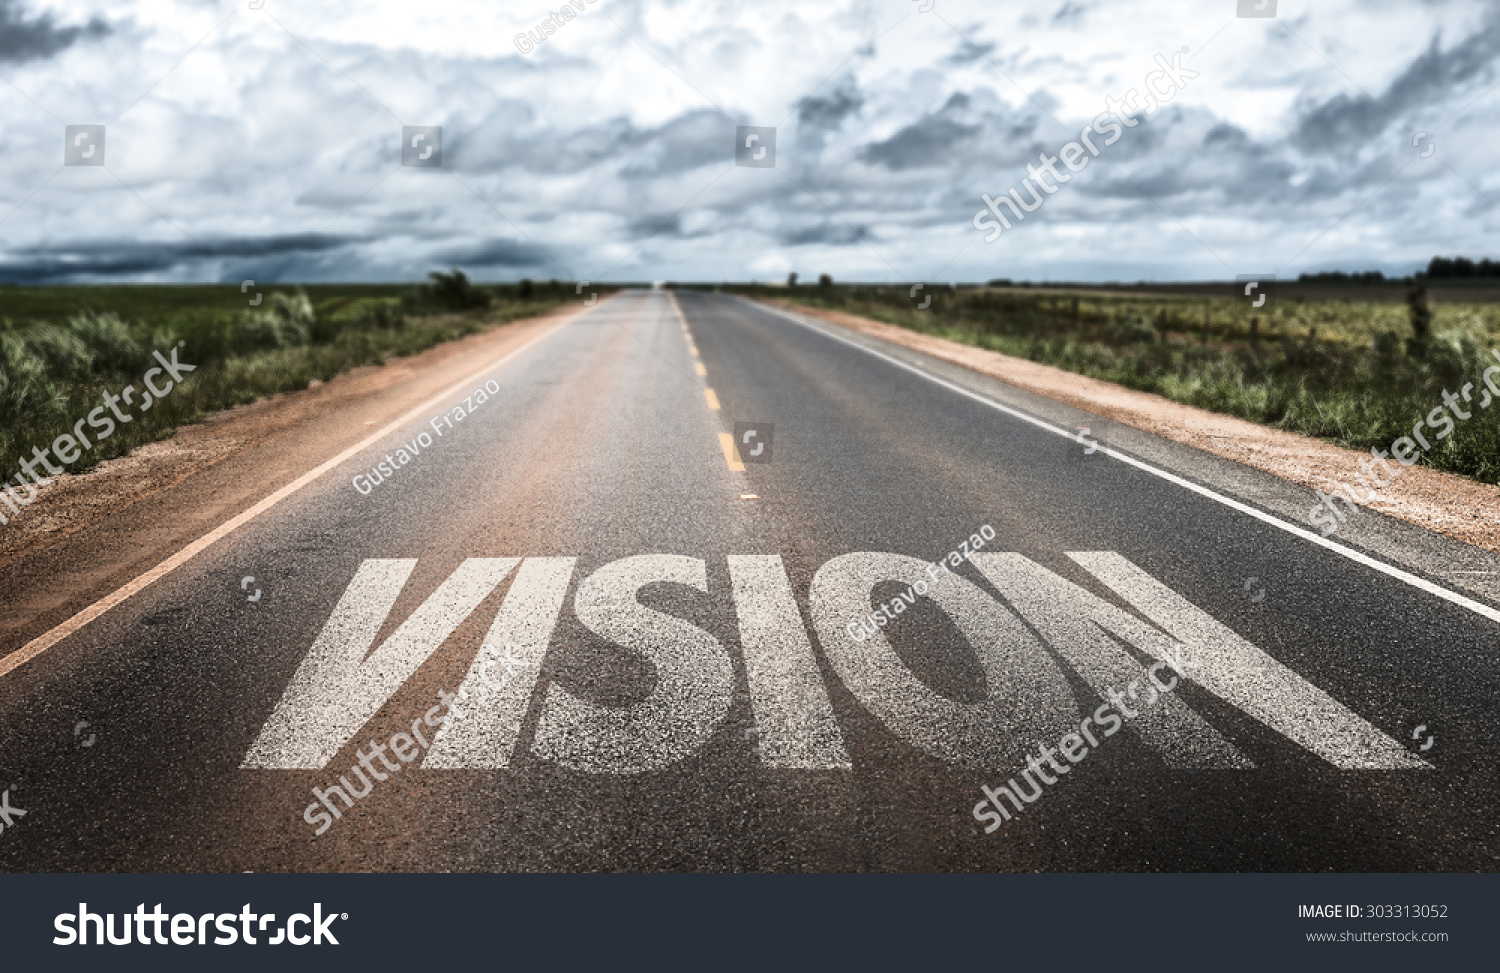 Vision written on road #303313052